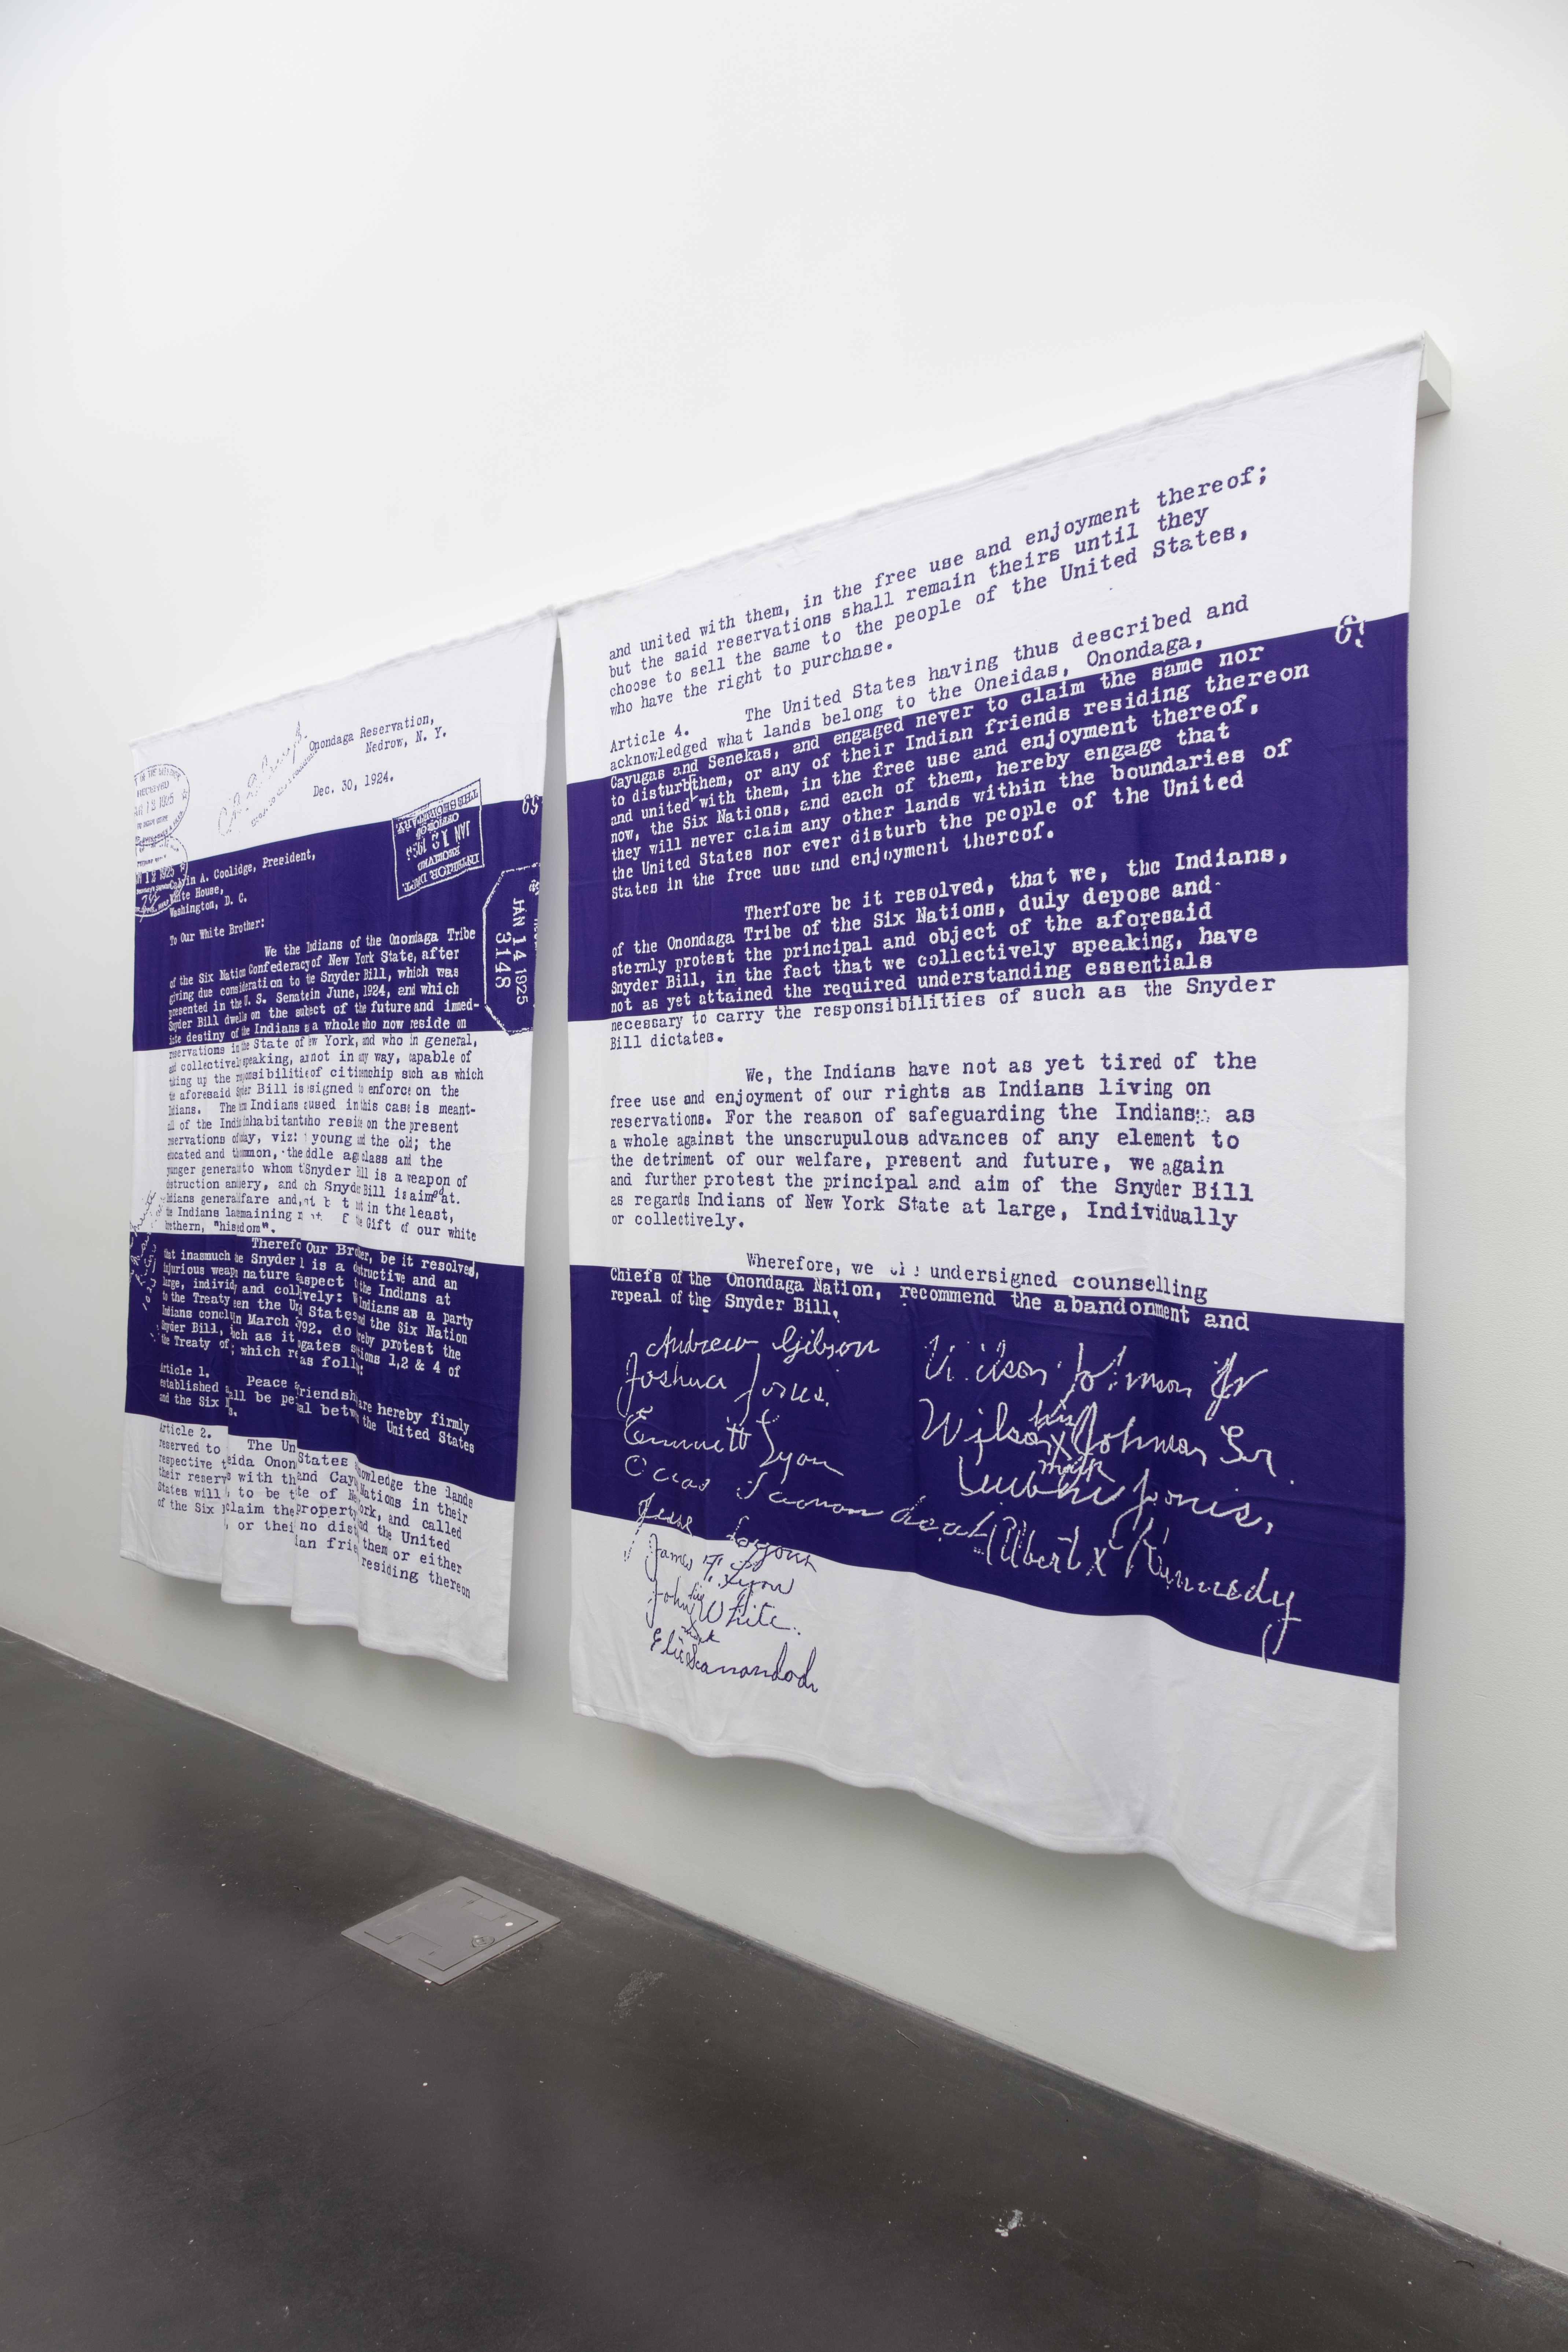  [Image description Artist Alan Michelson's, artwork of a reproduction of the December 30, 1924 letter to Calvin Coolidge by the chiefs of the Onondaga Nation, protesting the Indian Citizenship Act and reaffirming Onondaga sovereignty. The reproduction is on a pair of blankets in the colors white and purple and hangs on a white gallery wall with a dark concrete floor.]